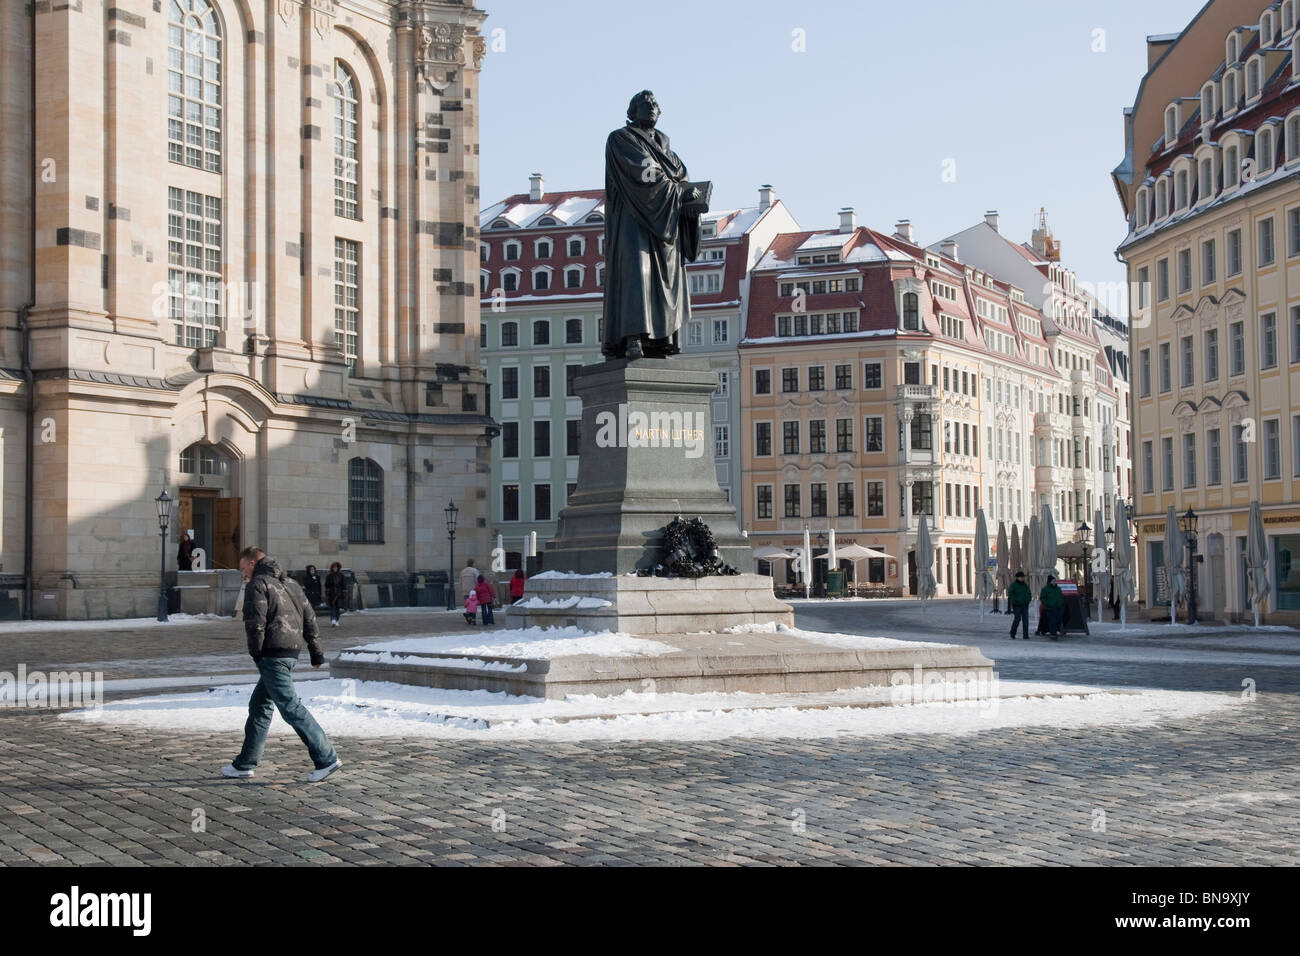 Statue of Martin Luther outside the Frauenkirche, Dresden, Germany. Stock Photo